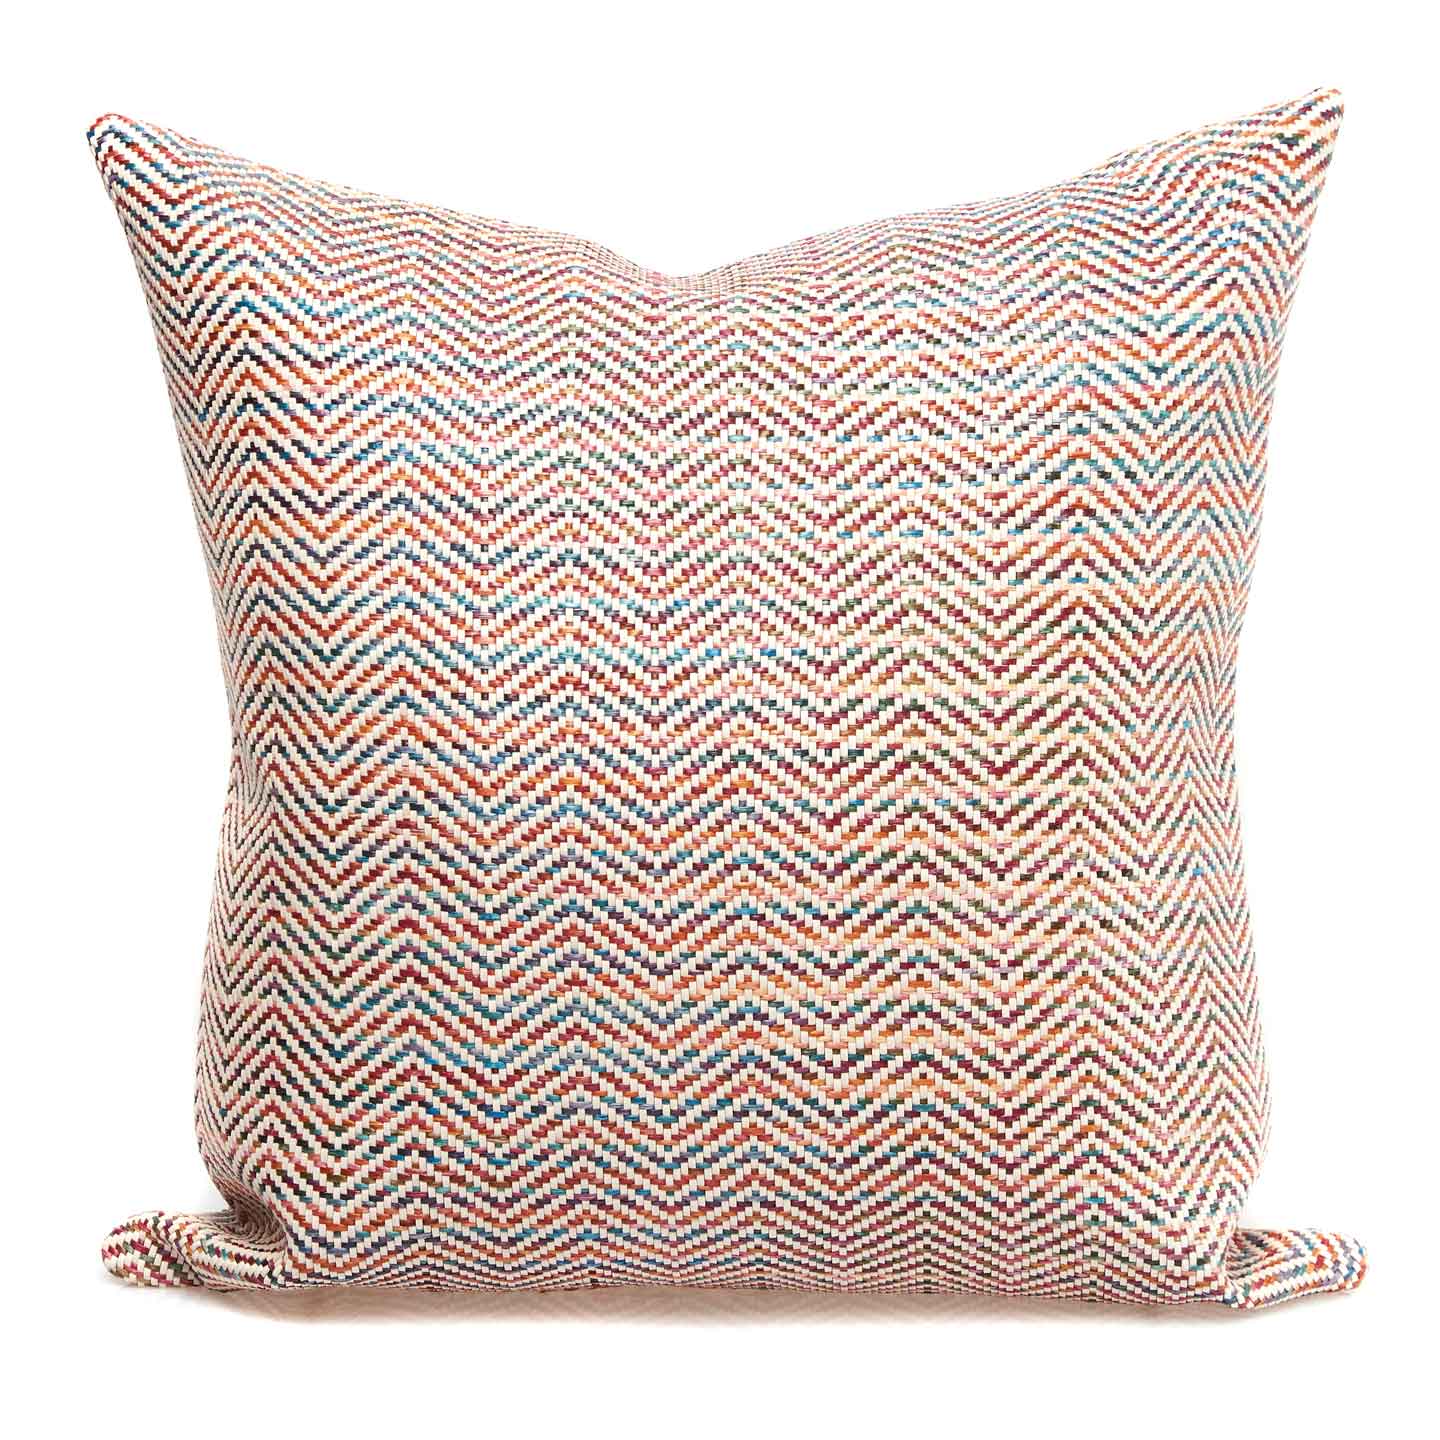 The Charlotte pillow by Beau Home